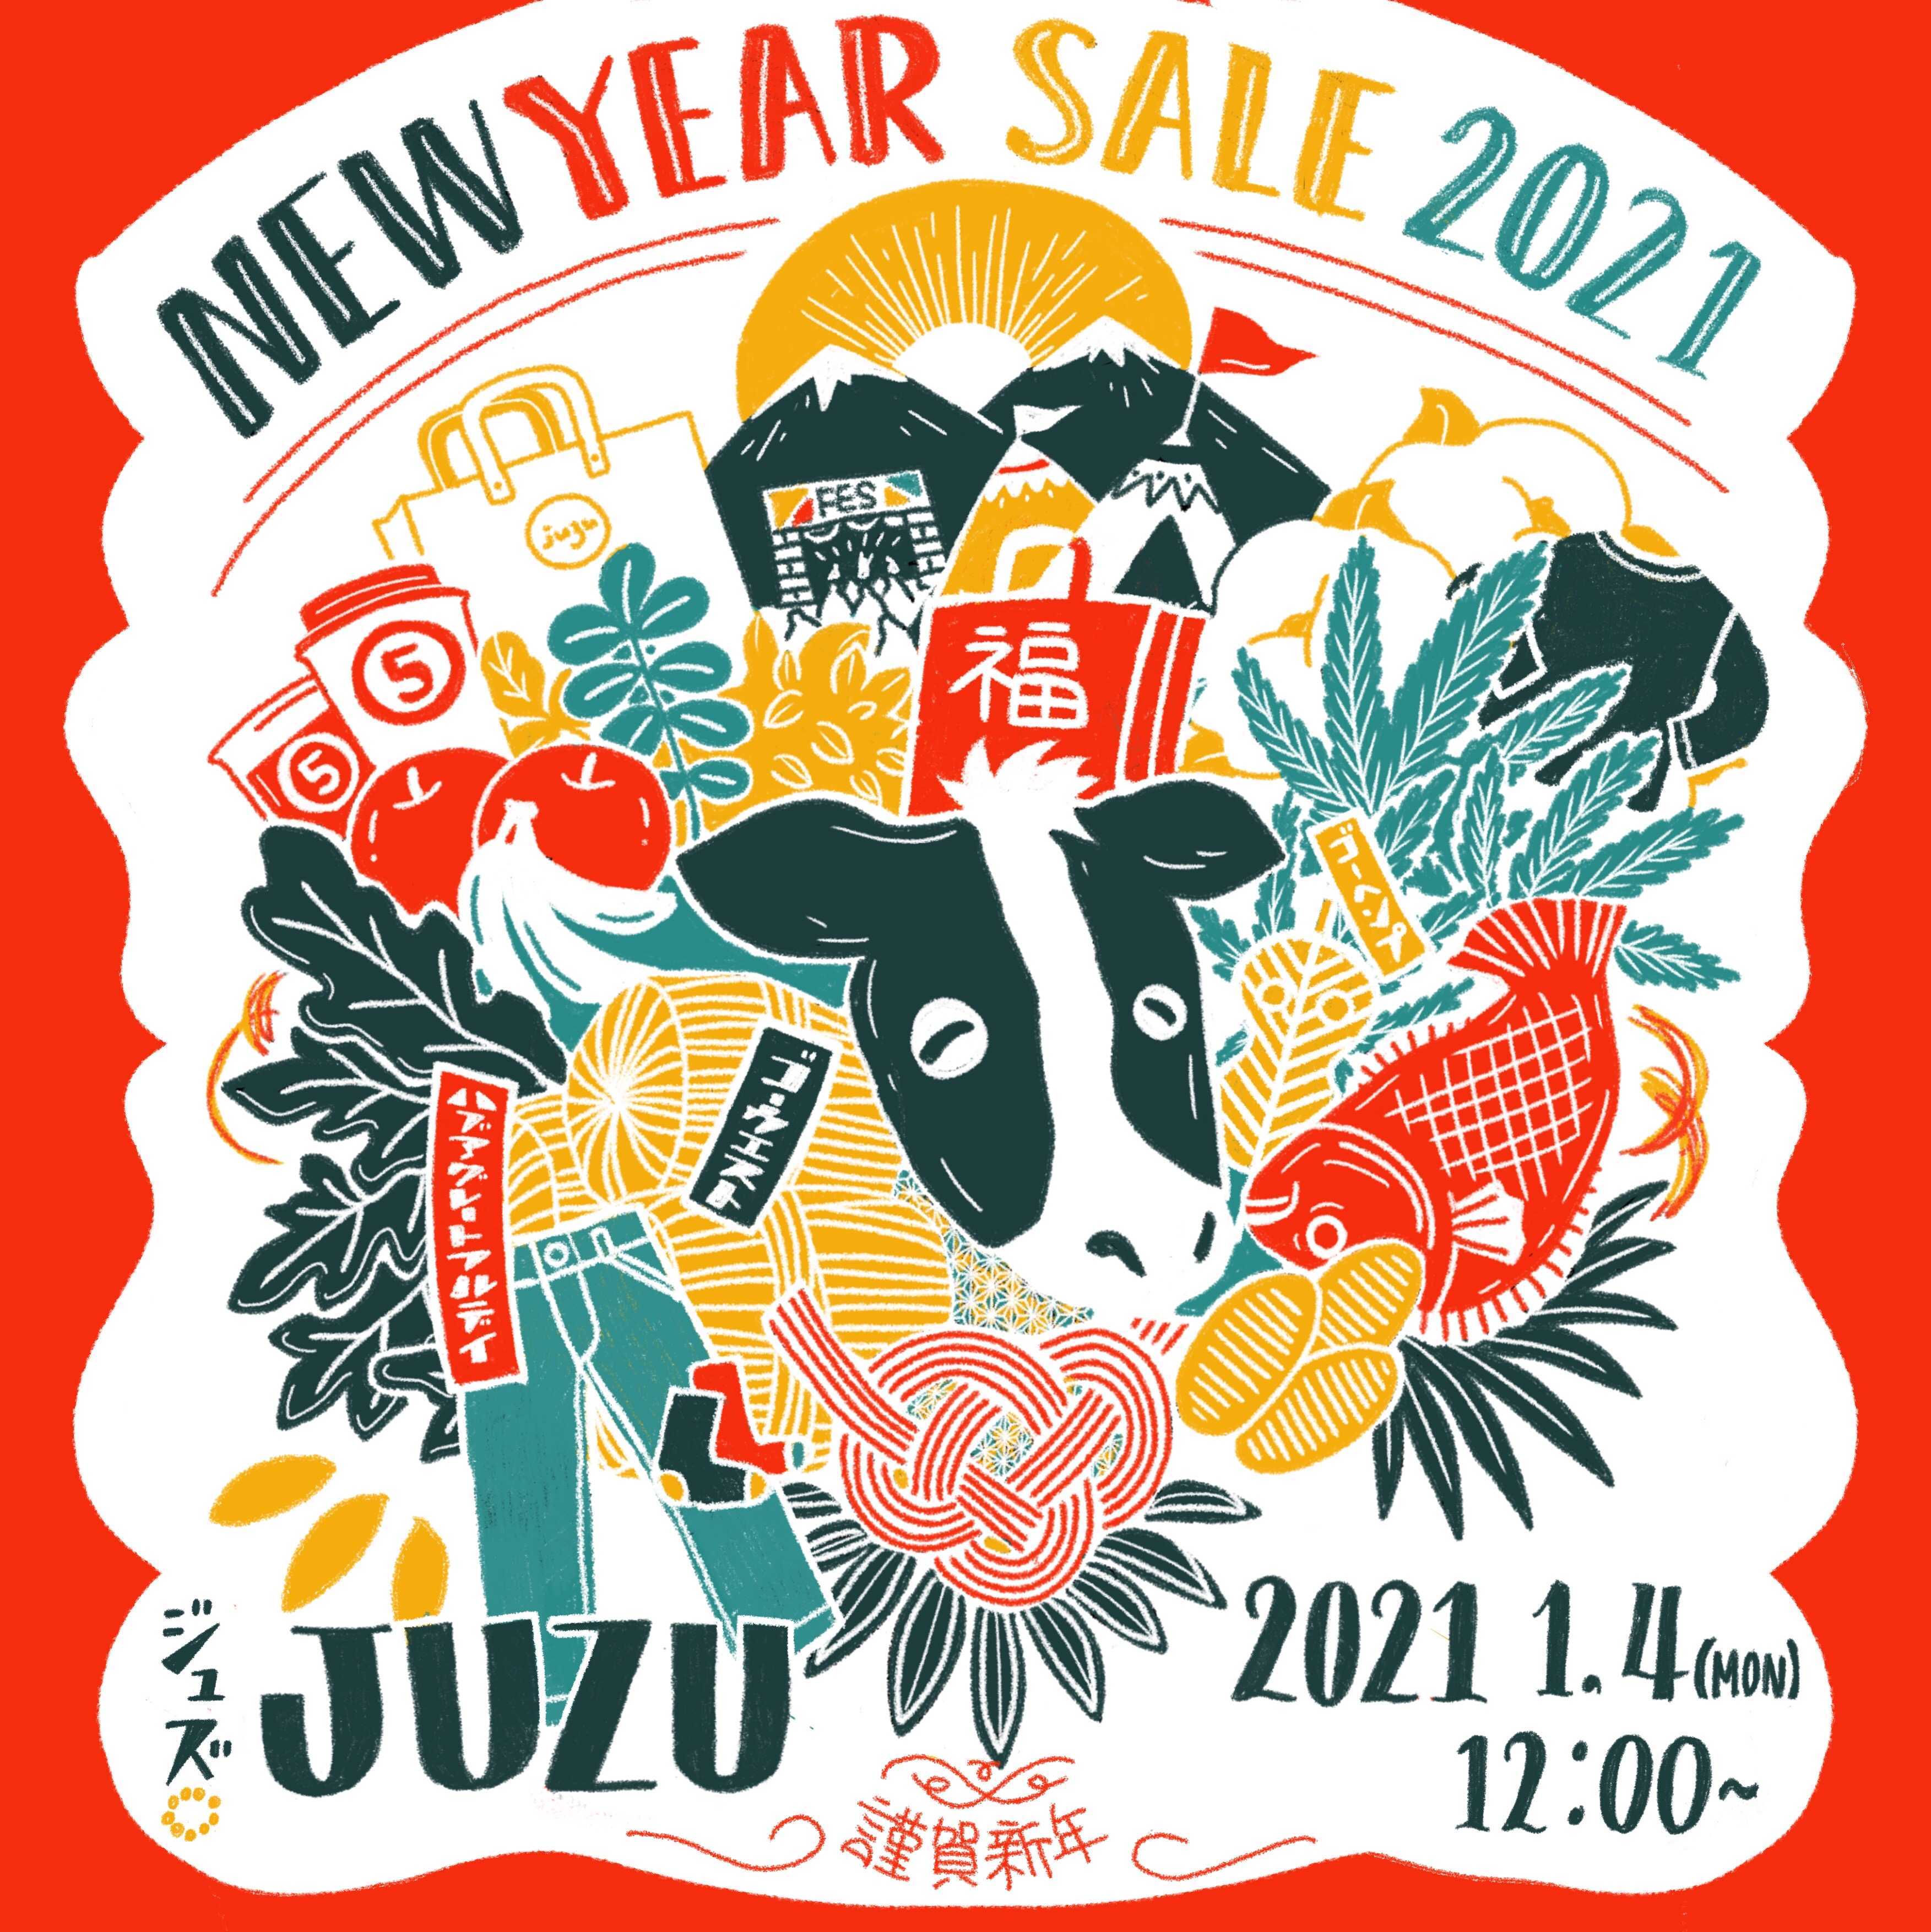 NEW YEAR SALE 2021